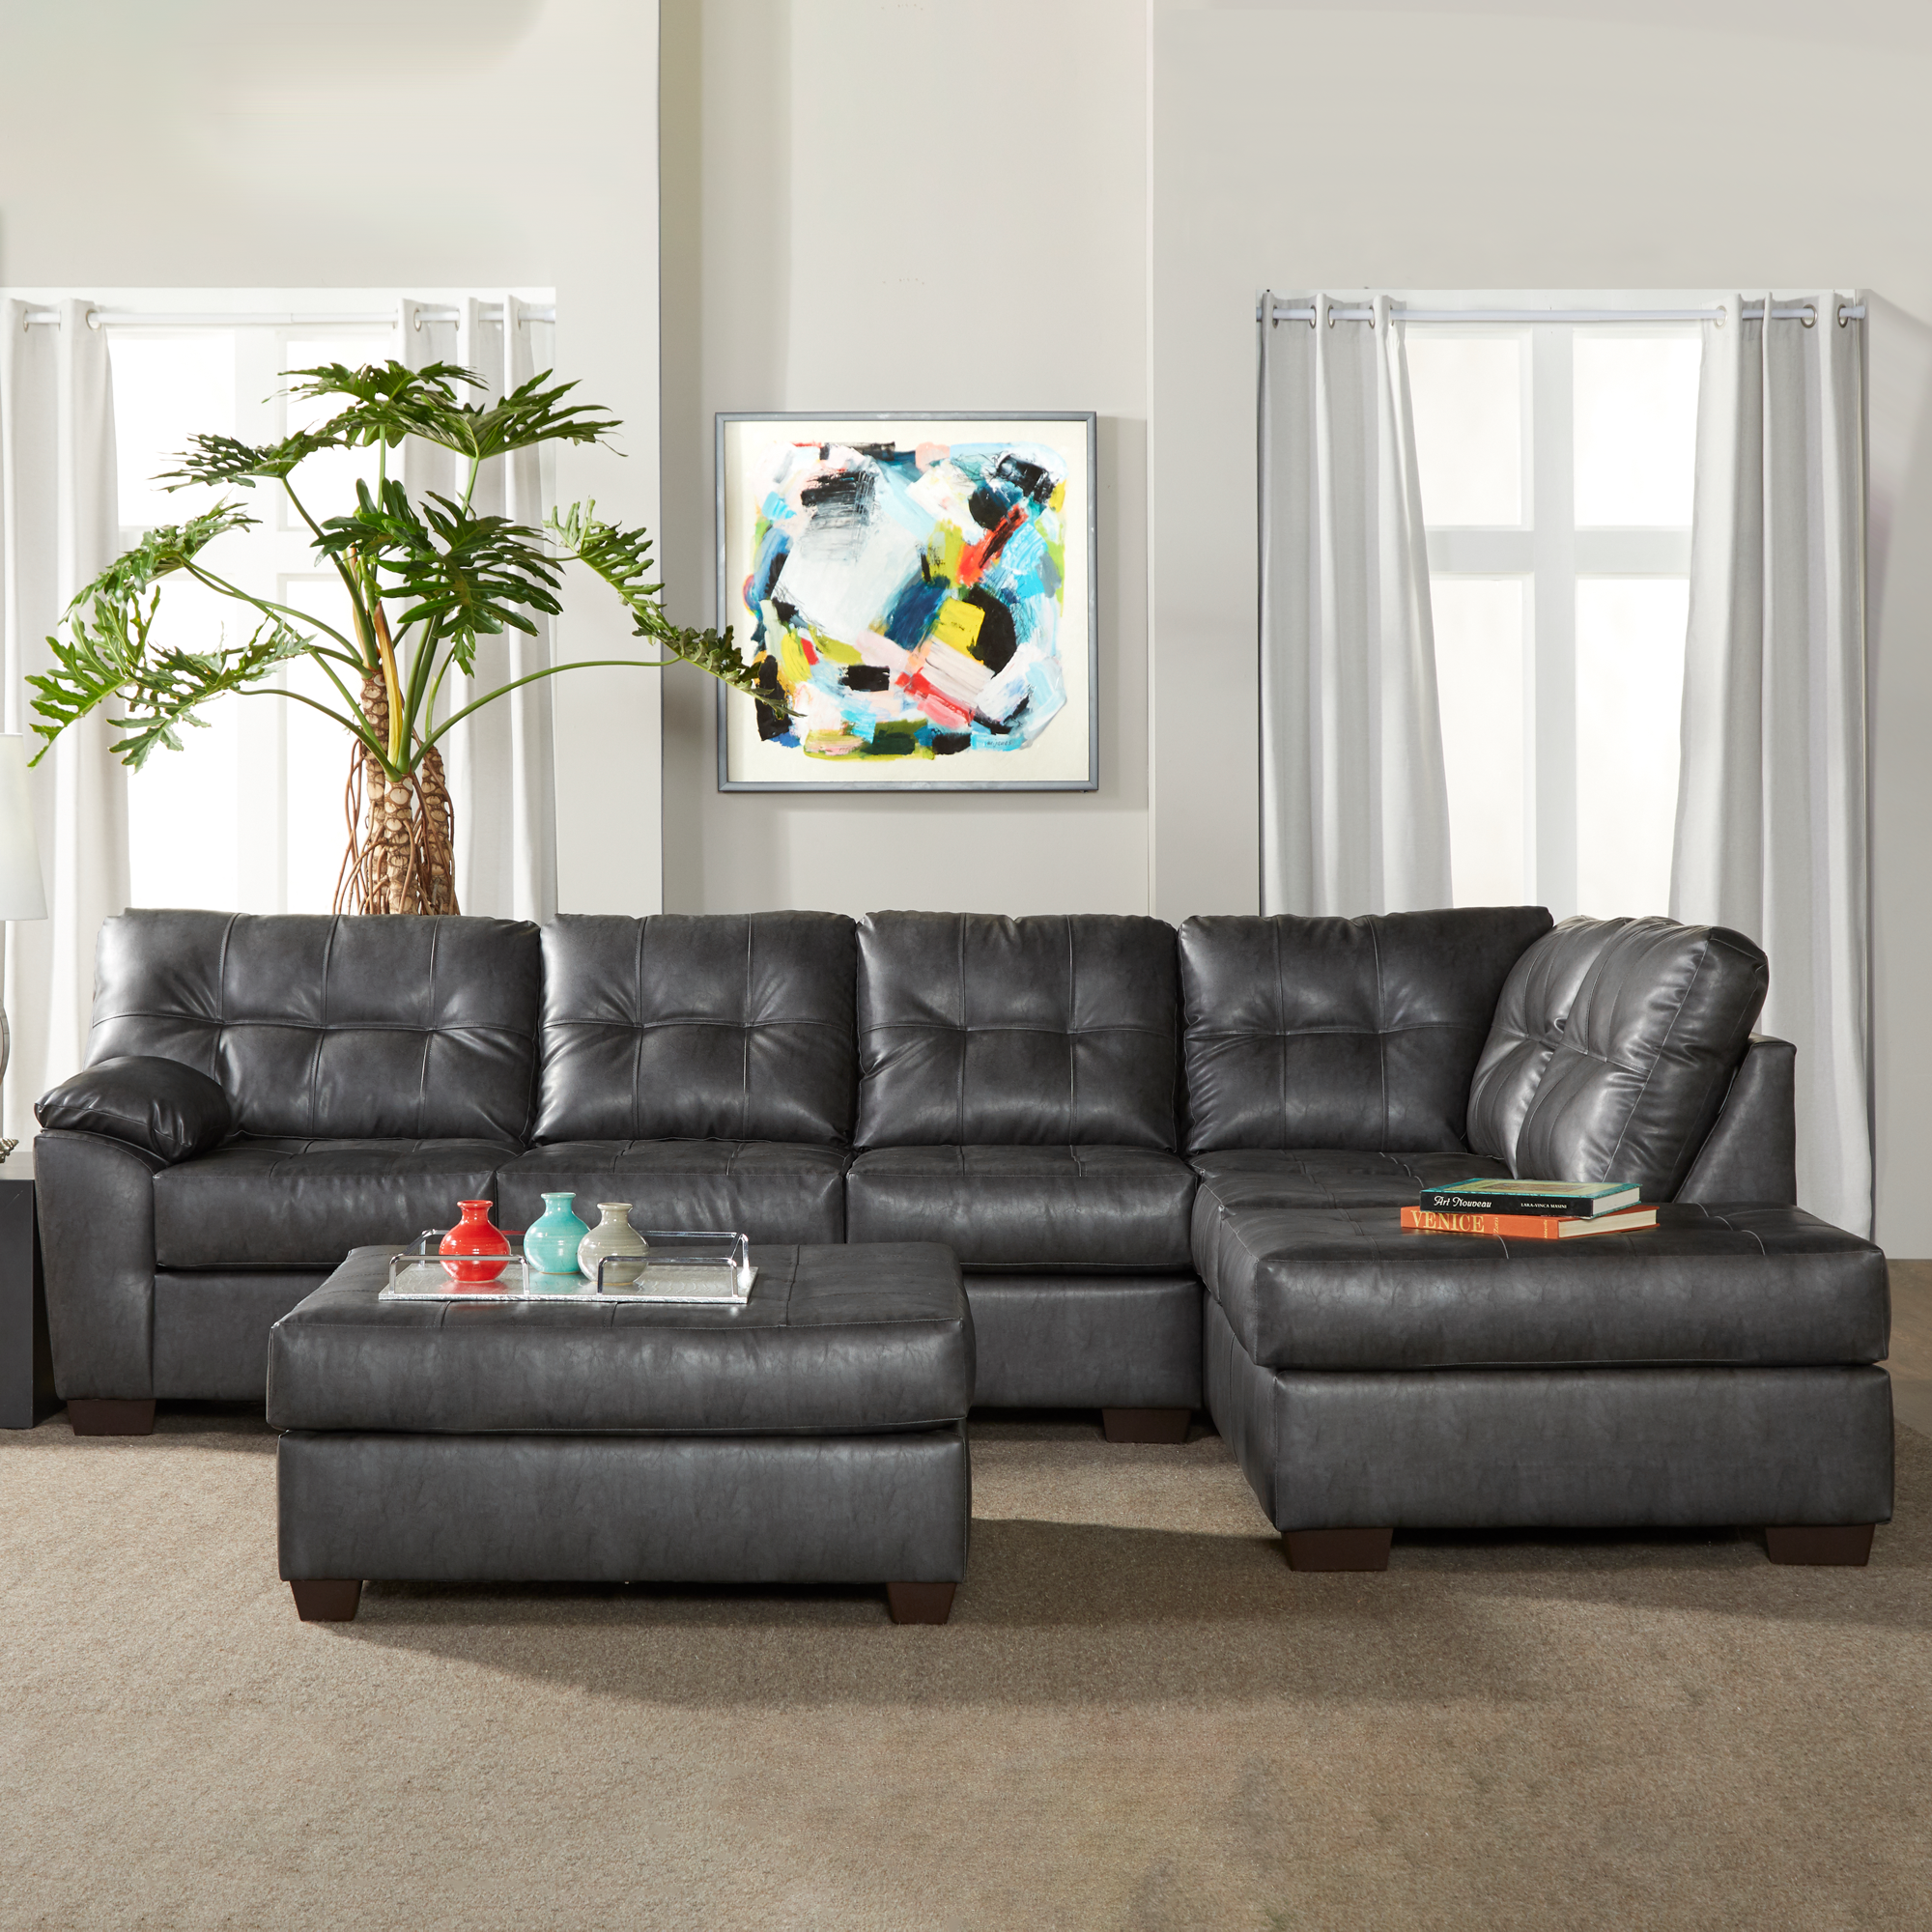 Addington Co Dallas Vegan Leather Sectional Sofa with Right Facing Chaise for Living Room, L-Shape, 6-Seats